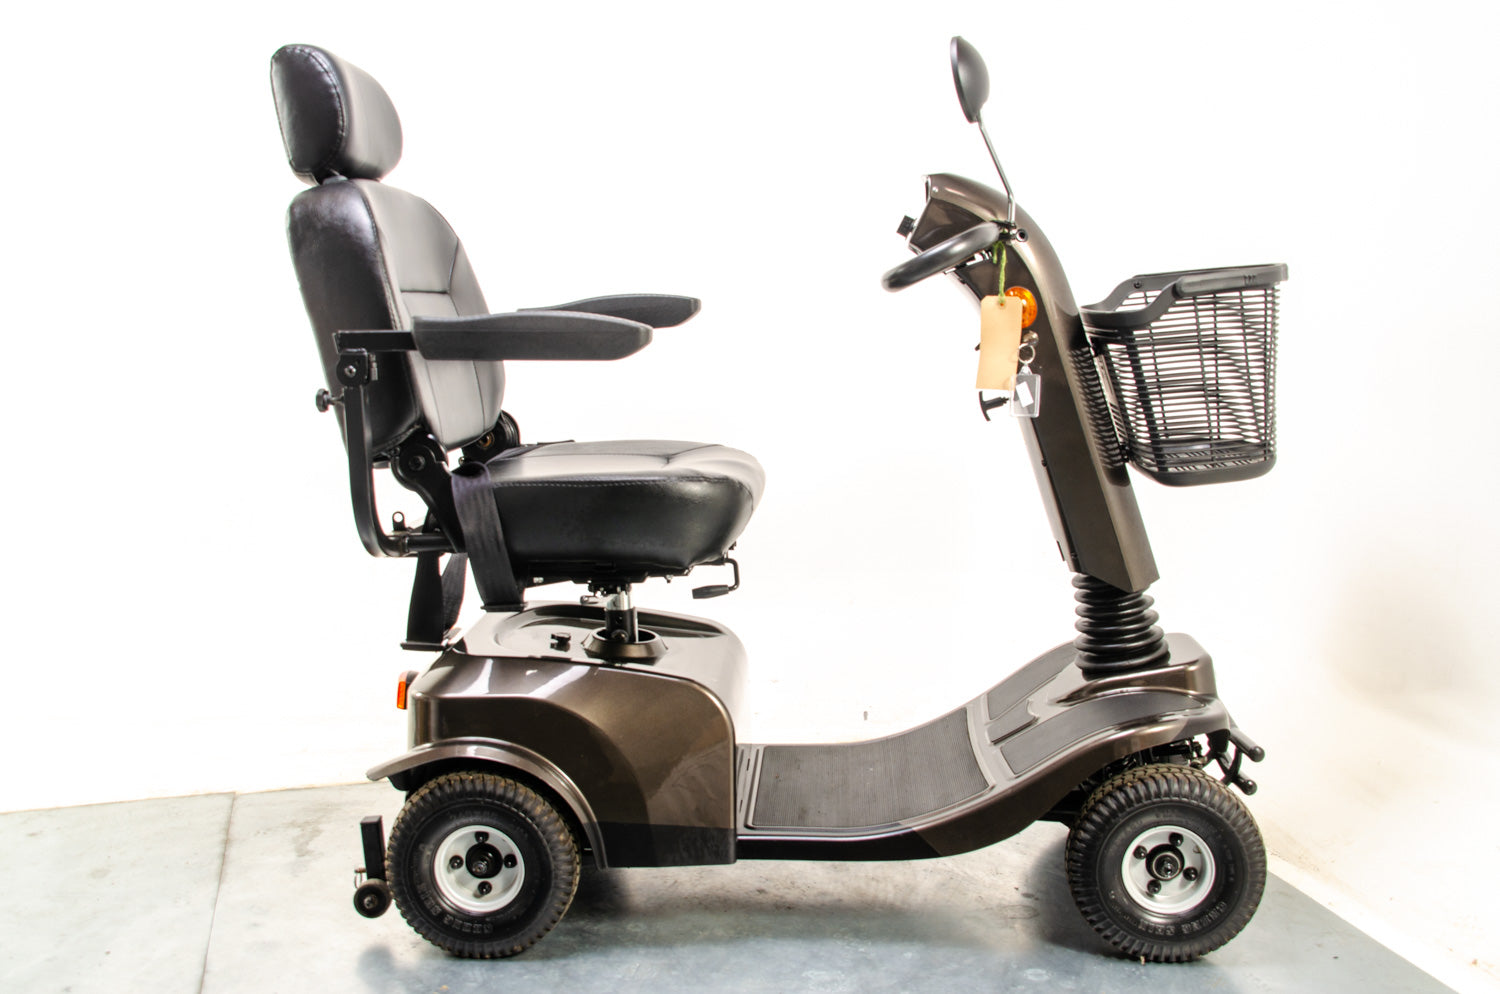 Parade 8 Mobility Scooter 8mph Midsize Luxury All-Terrain